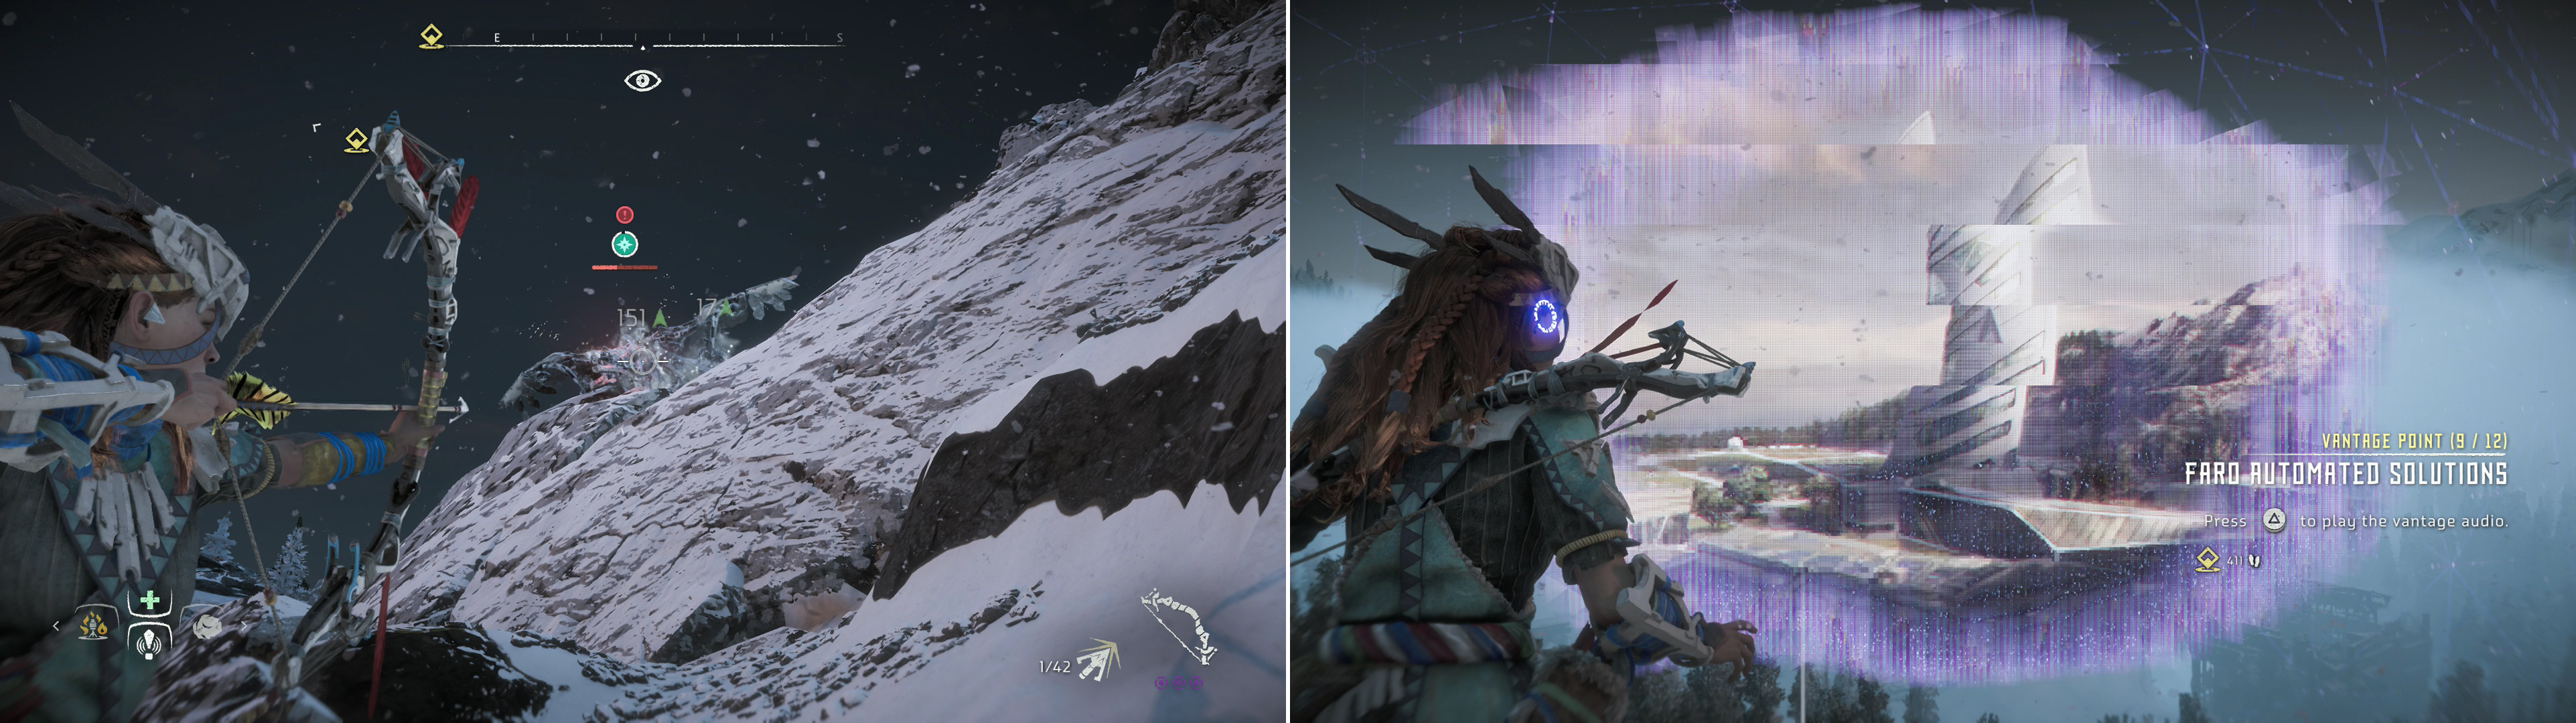 Dispose of the Glinthawks (left) then climb a pillar to scan the Vantage - Faro Automated Solutions (right).